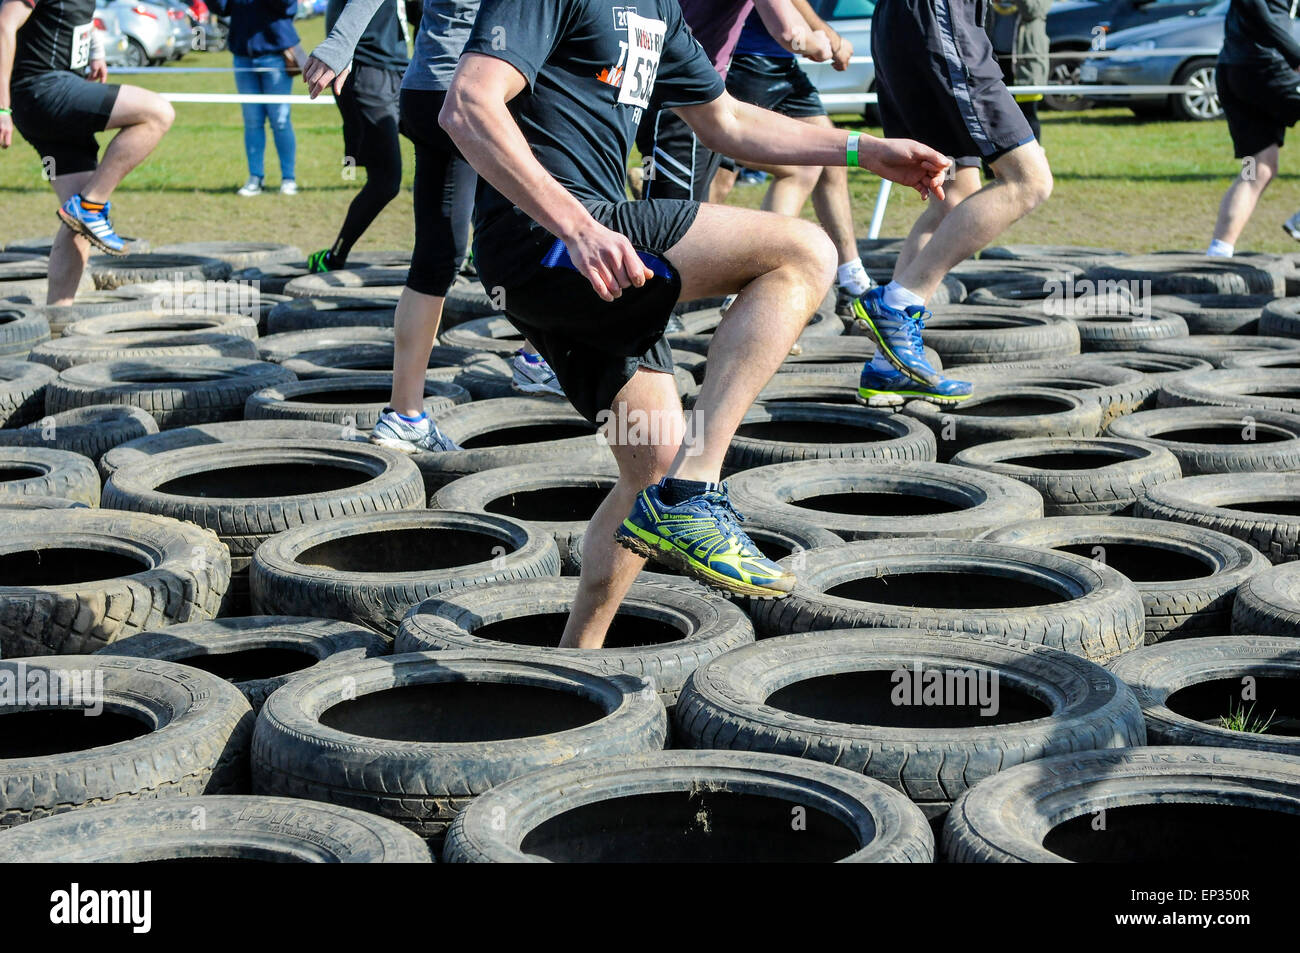 Brightly colored running shoes on rubber tyres, obstacle course race Stock Photo